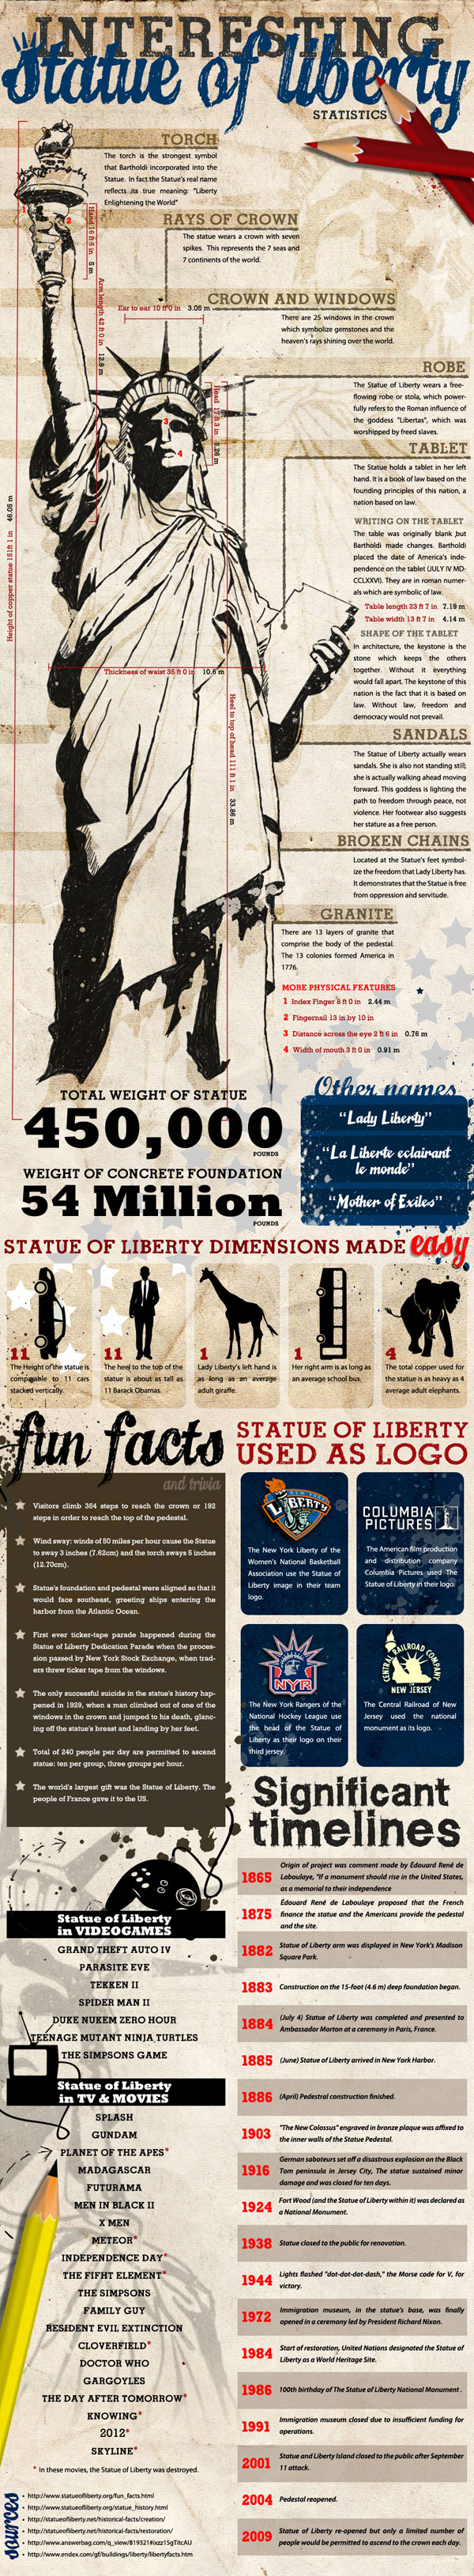 Fun facts about the Statue of Liberty.